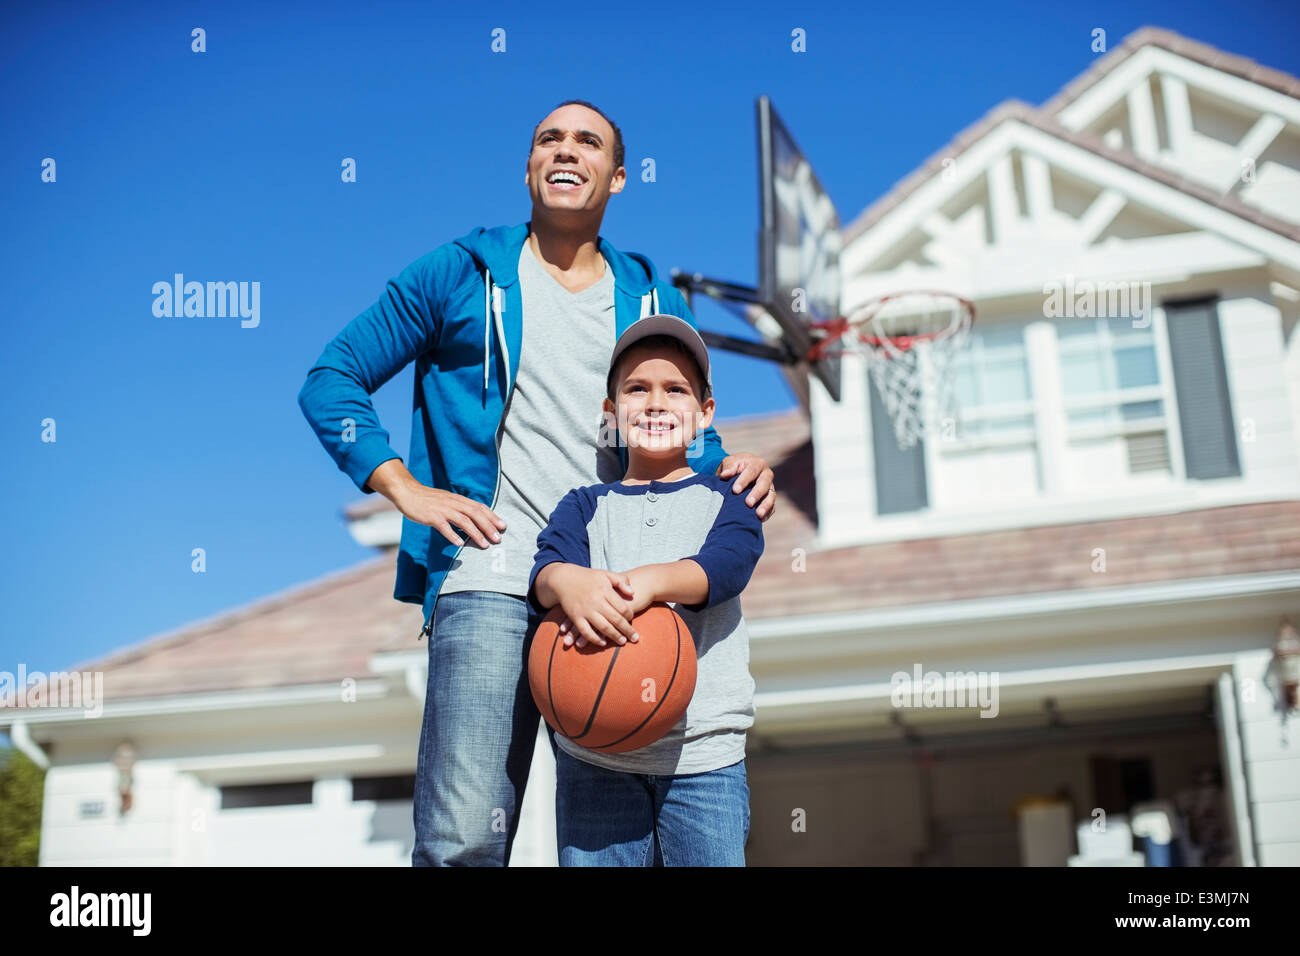 Father and son with basketball in driveway Stock Photo